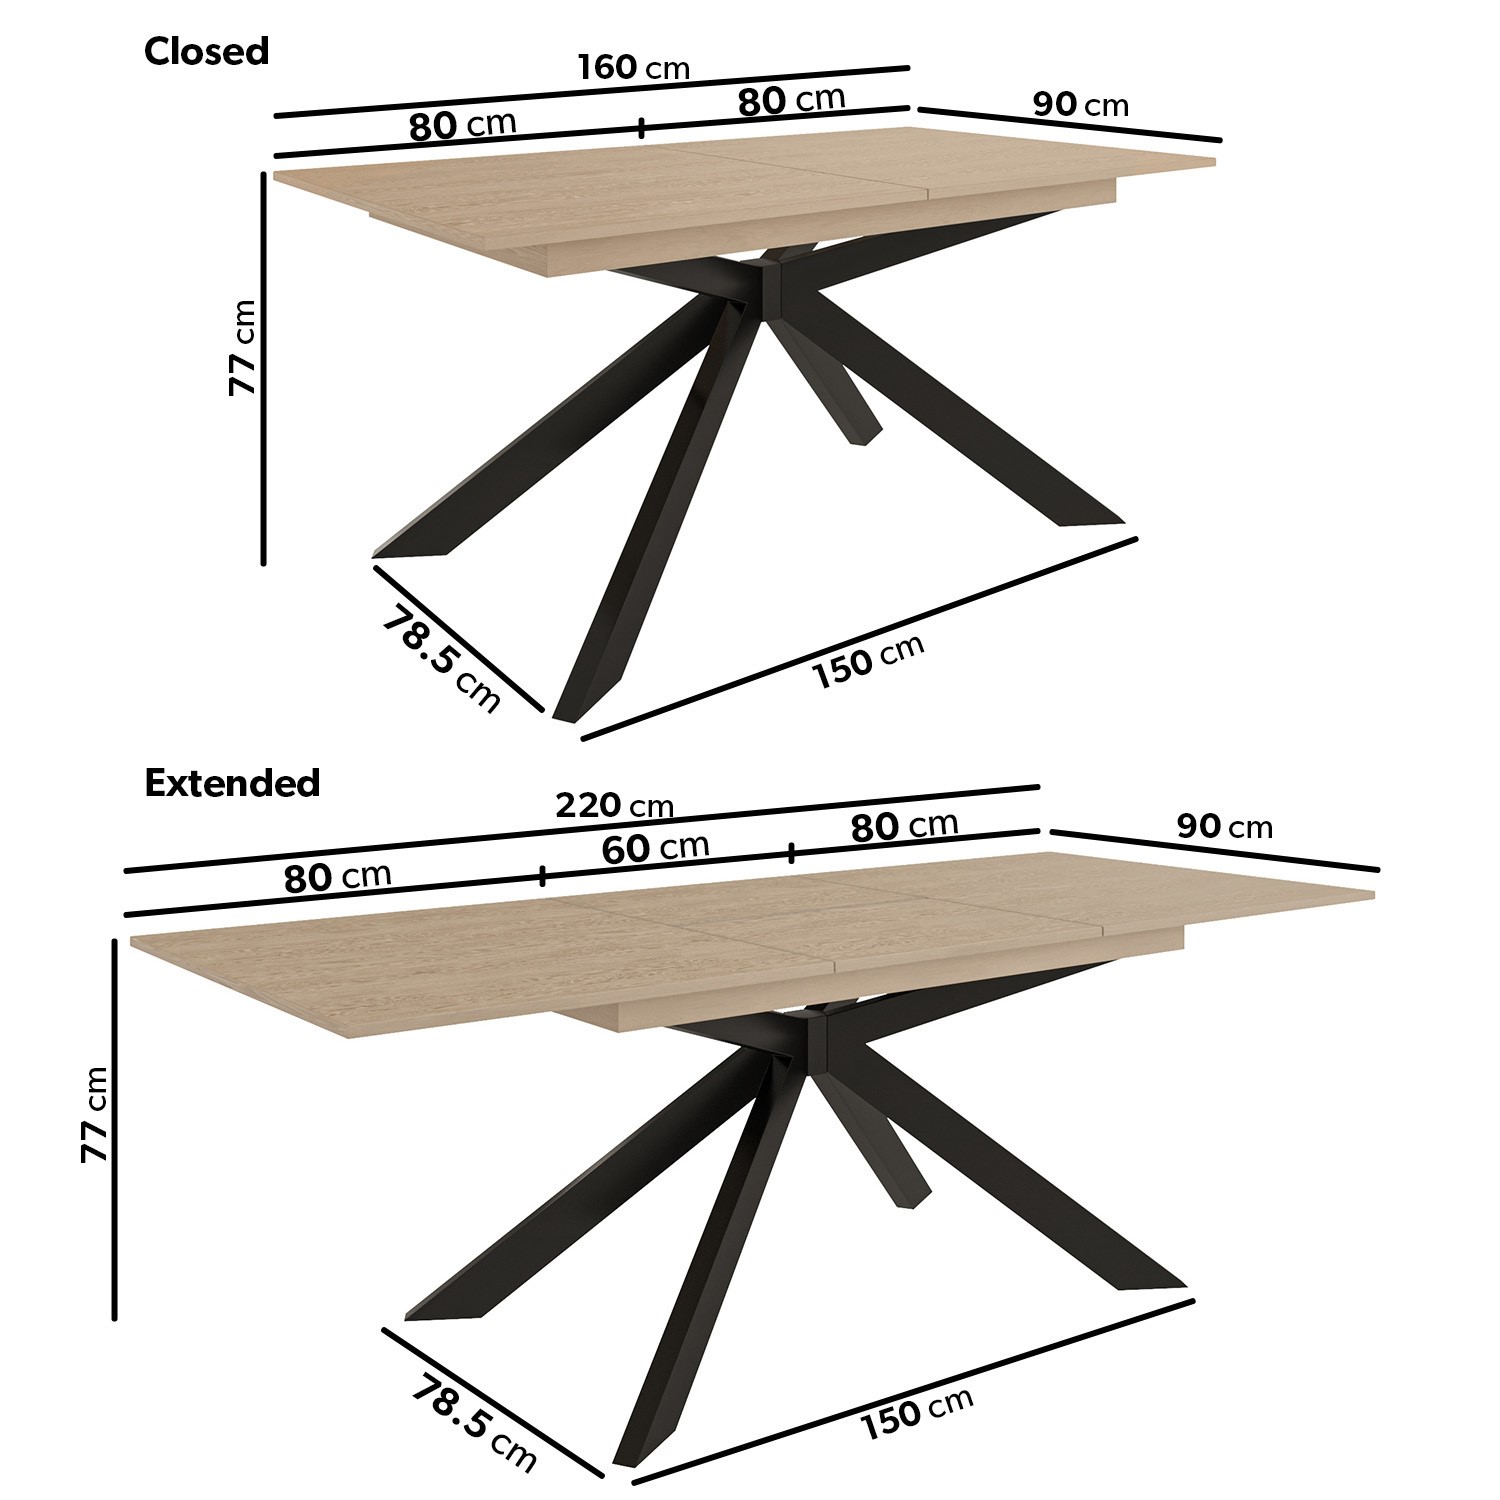 Read more about Large light oak extendable dining table seats 6-8 carson